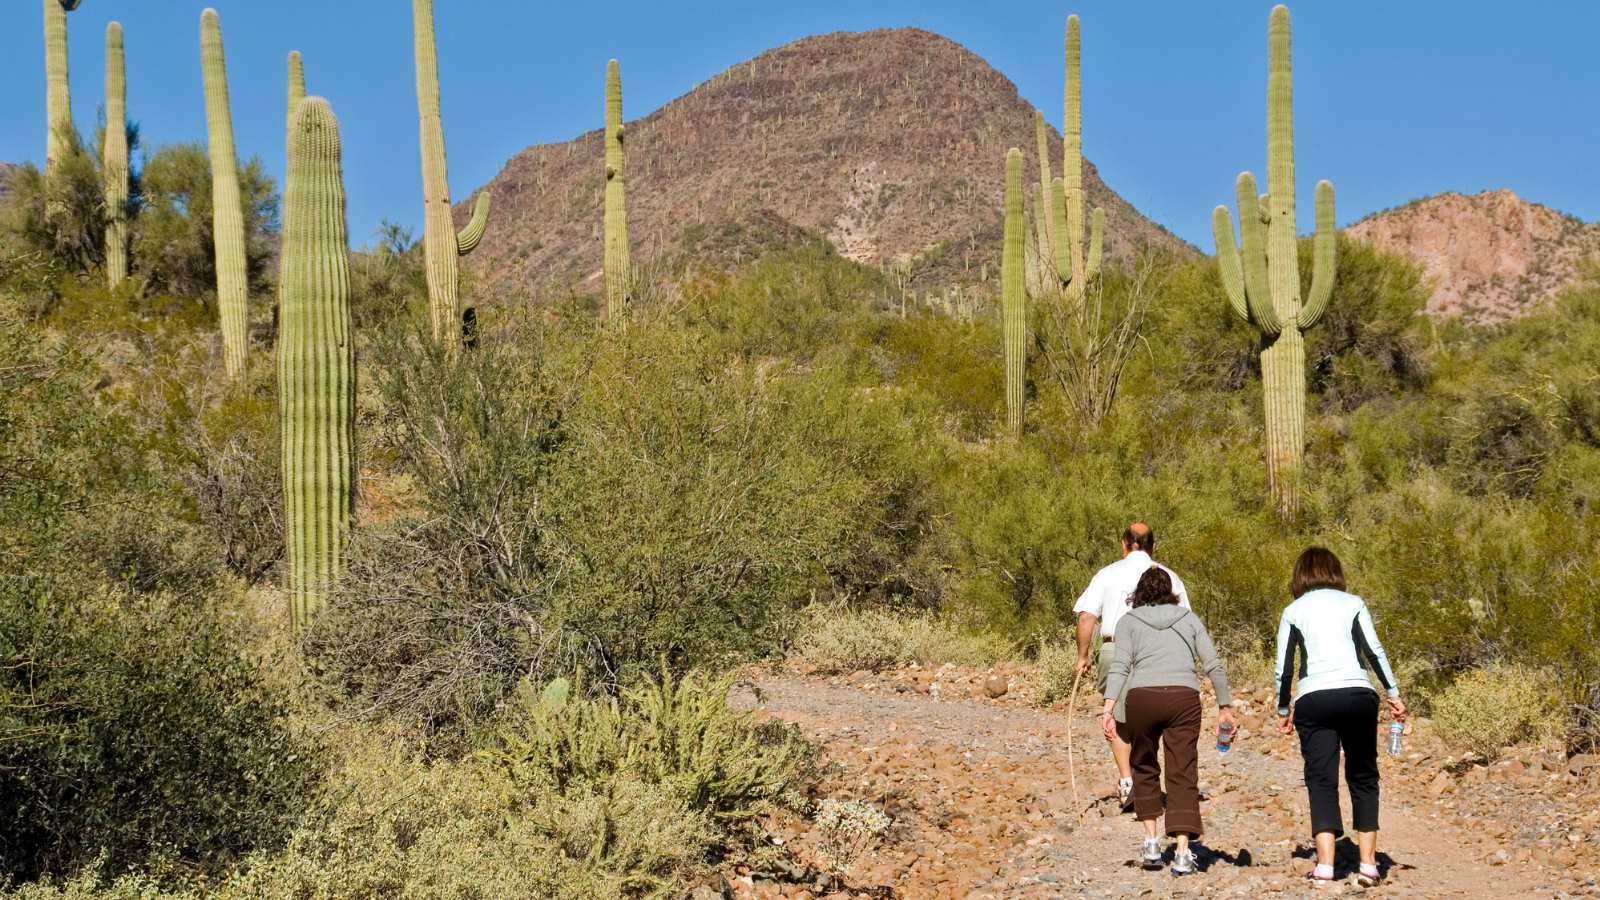 three people walk in the desert with large cactus